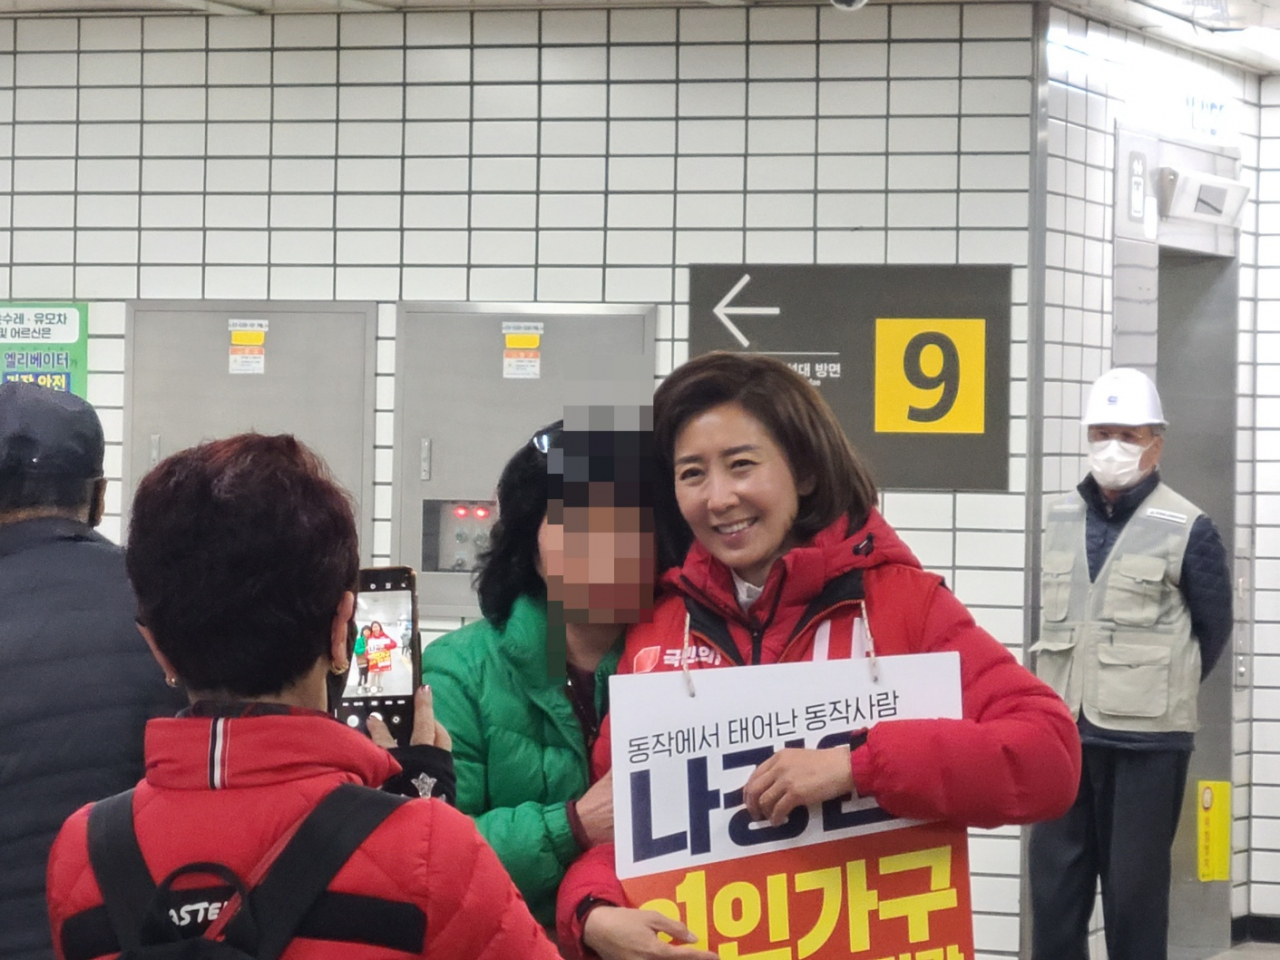 Na Kyung-won poses for a photo with a supporter at Sadang Station on Monday. (Jung Min-kyung/ The Korea Herald)